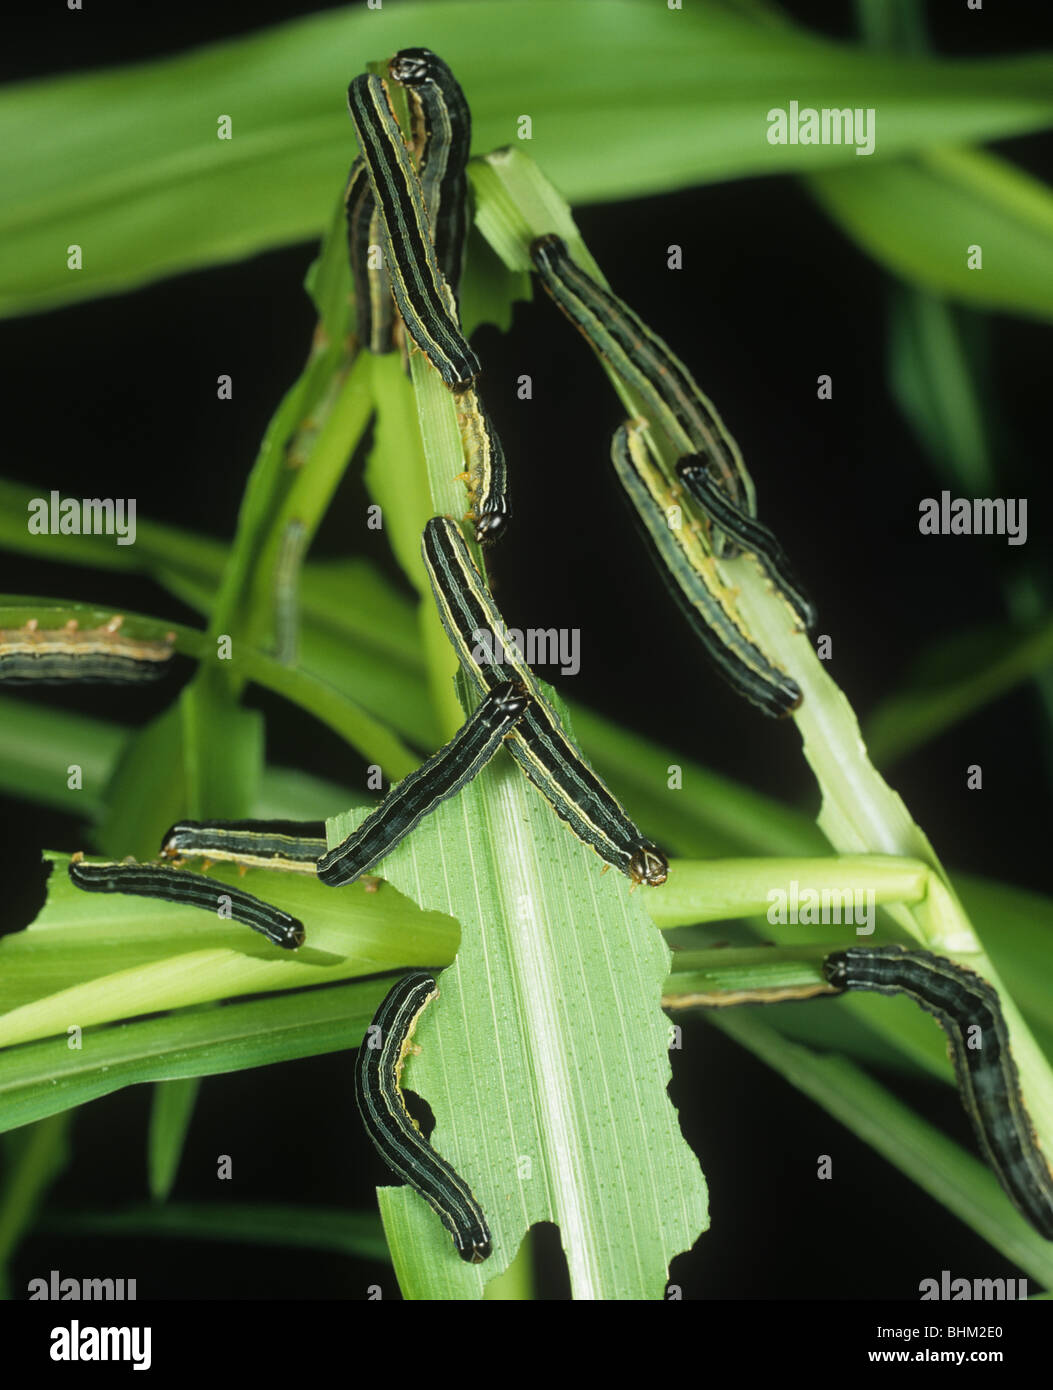 African armyworm (Spodoptera exempta) on damaged maize or corn leaves Stock Photo